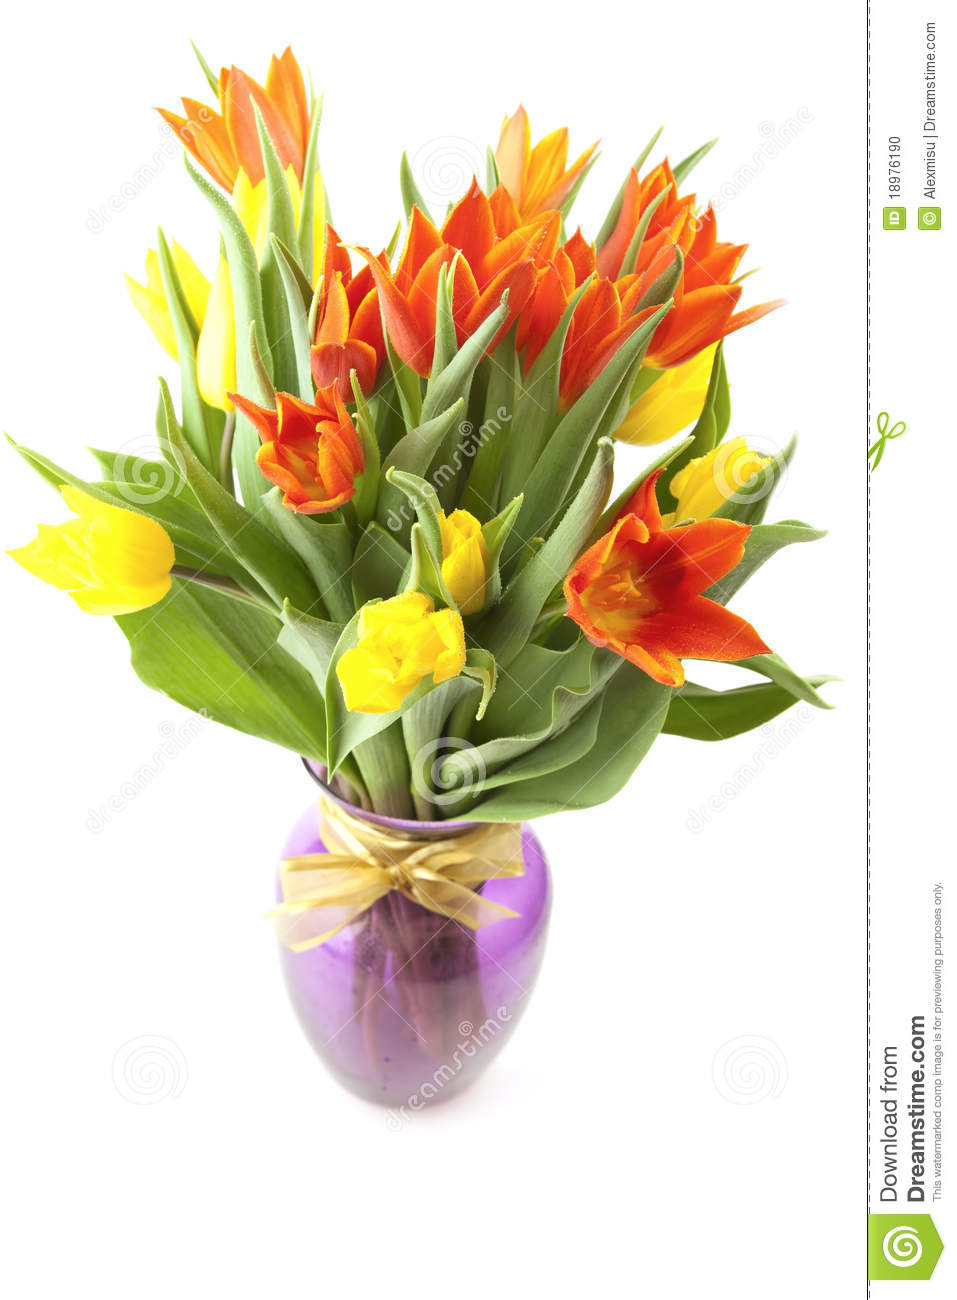 Bouquet Of Colorful Tulips In Vase On A White Background 